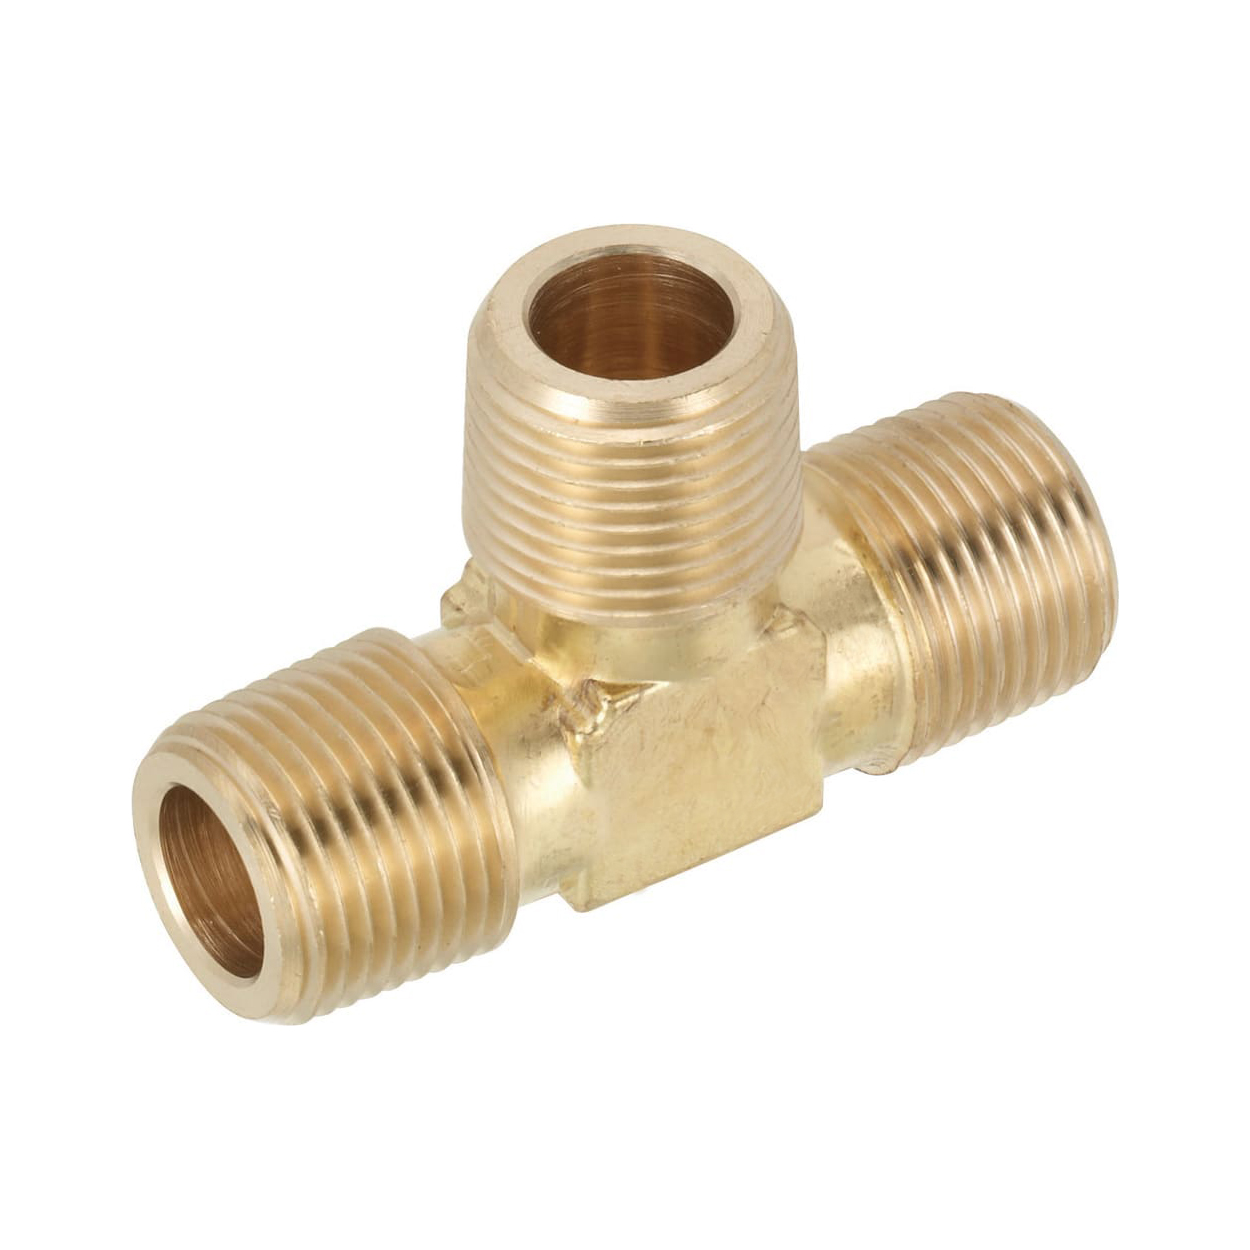 Brass Fittings for Steel Pipe / Tee / Threaded